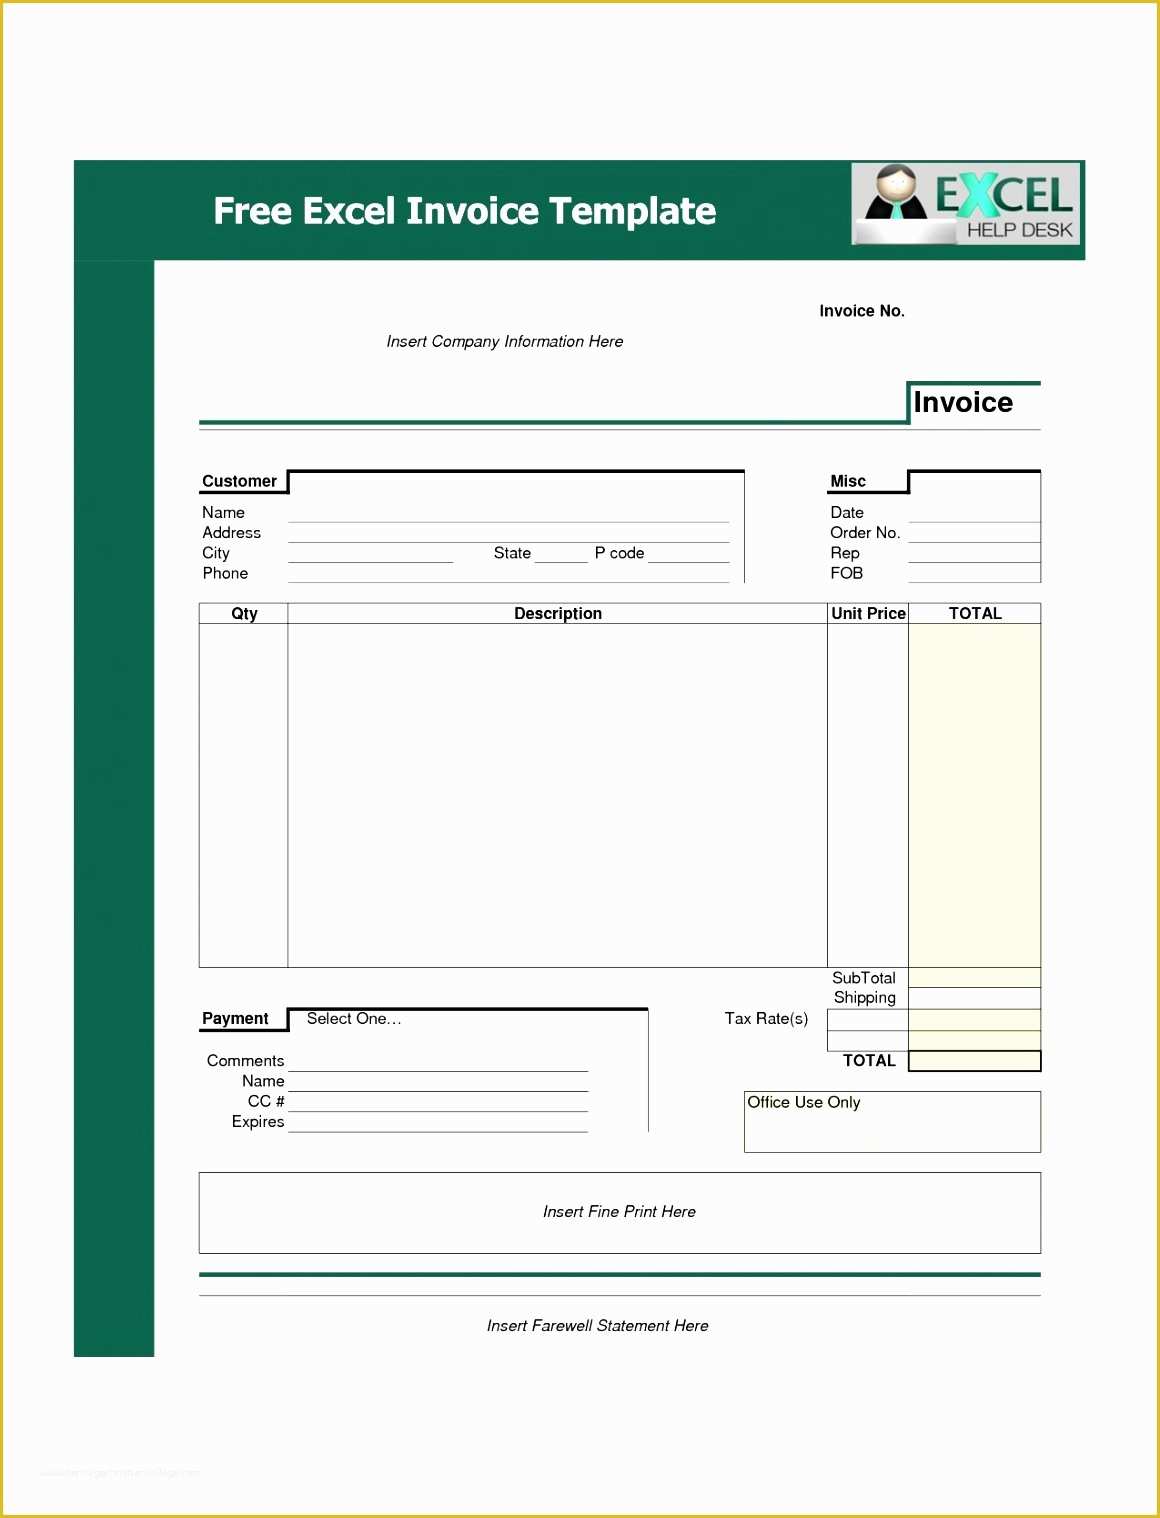 Microsoft Invoice Template Free Download Of 10 Microsoft Excel Invoice Template Free Download